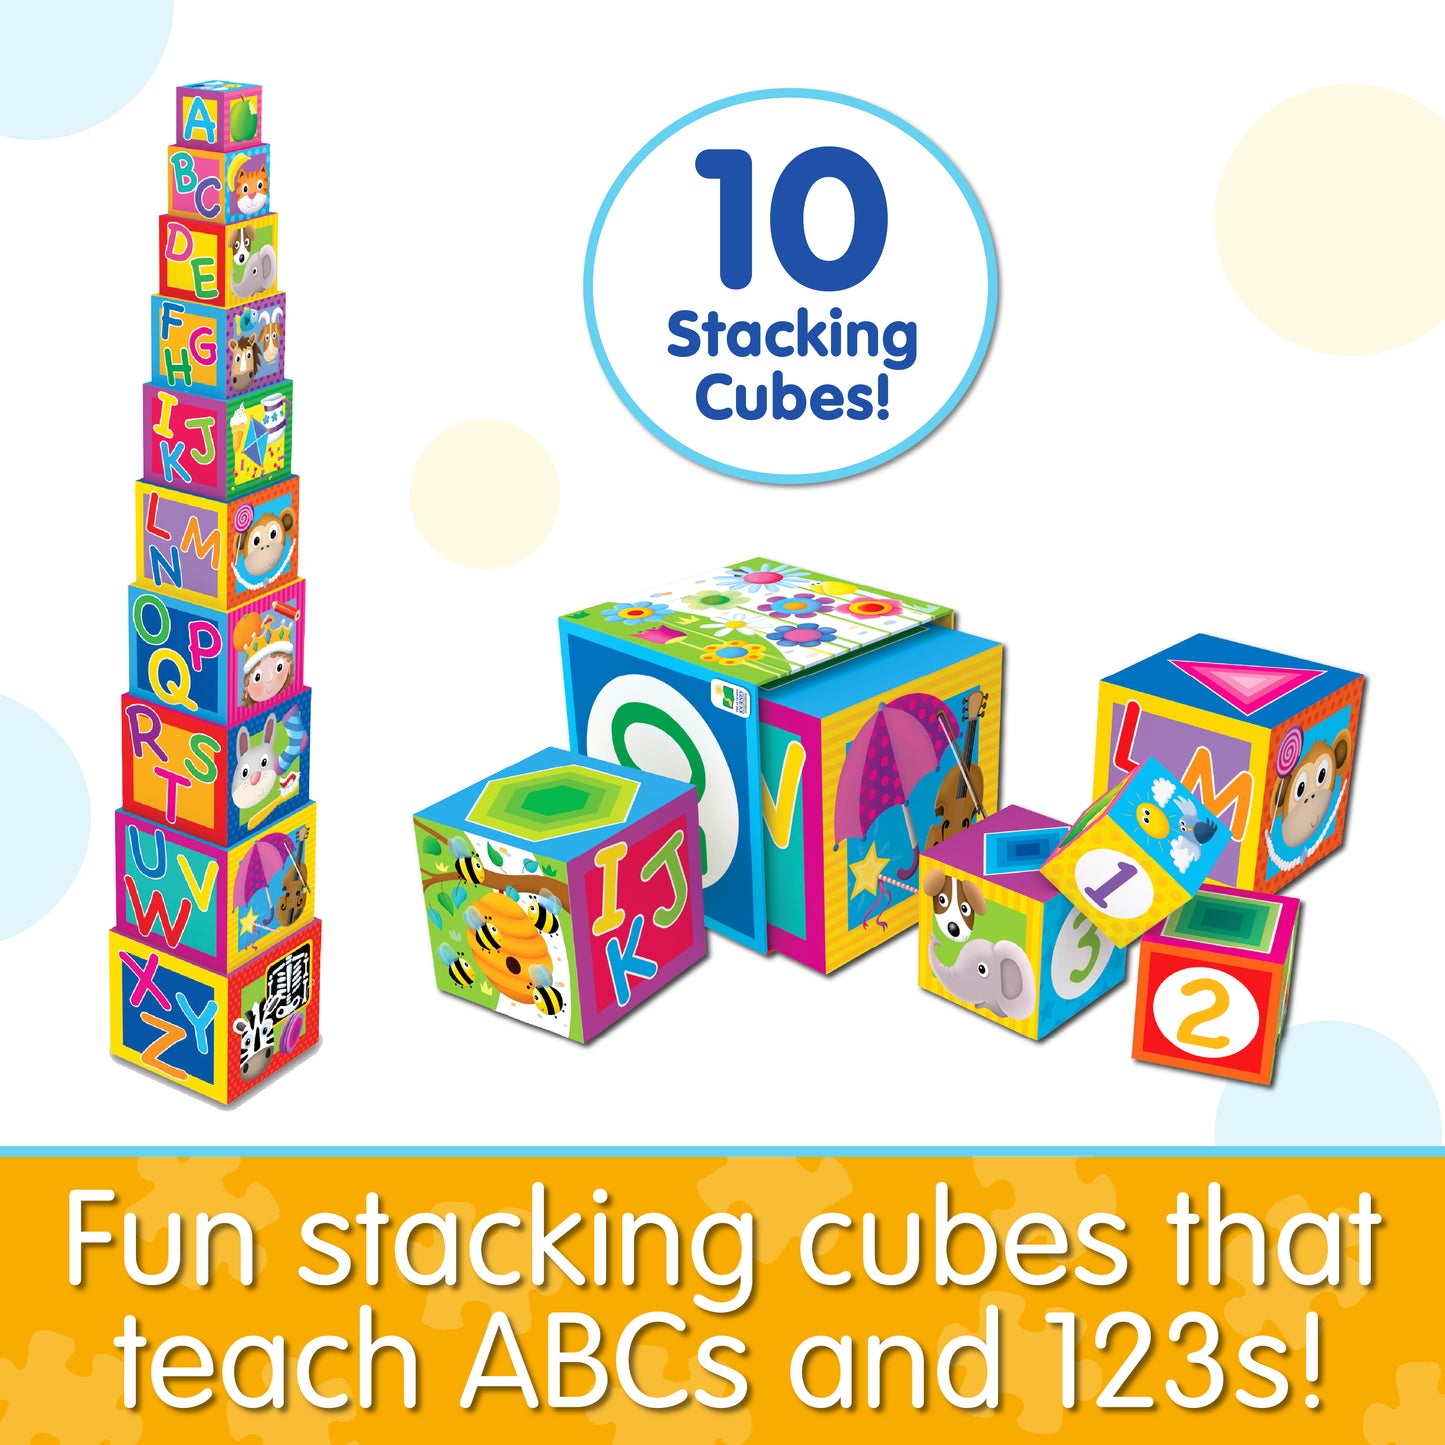 Infographic about Stacking Cubes that says, "Fun stacking cubes that teach ABCs and 123s!"